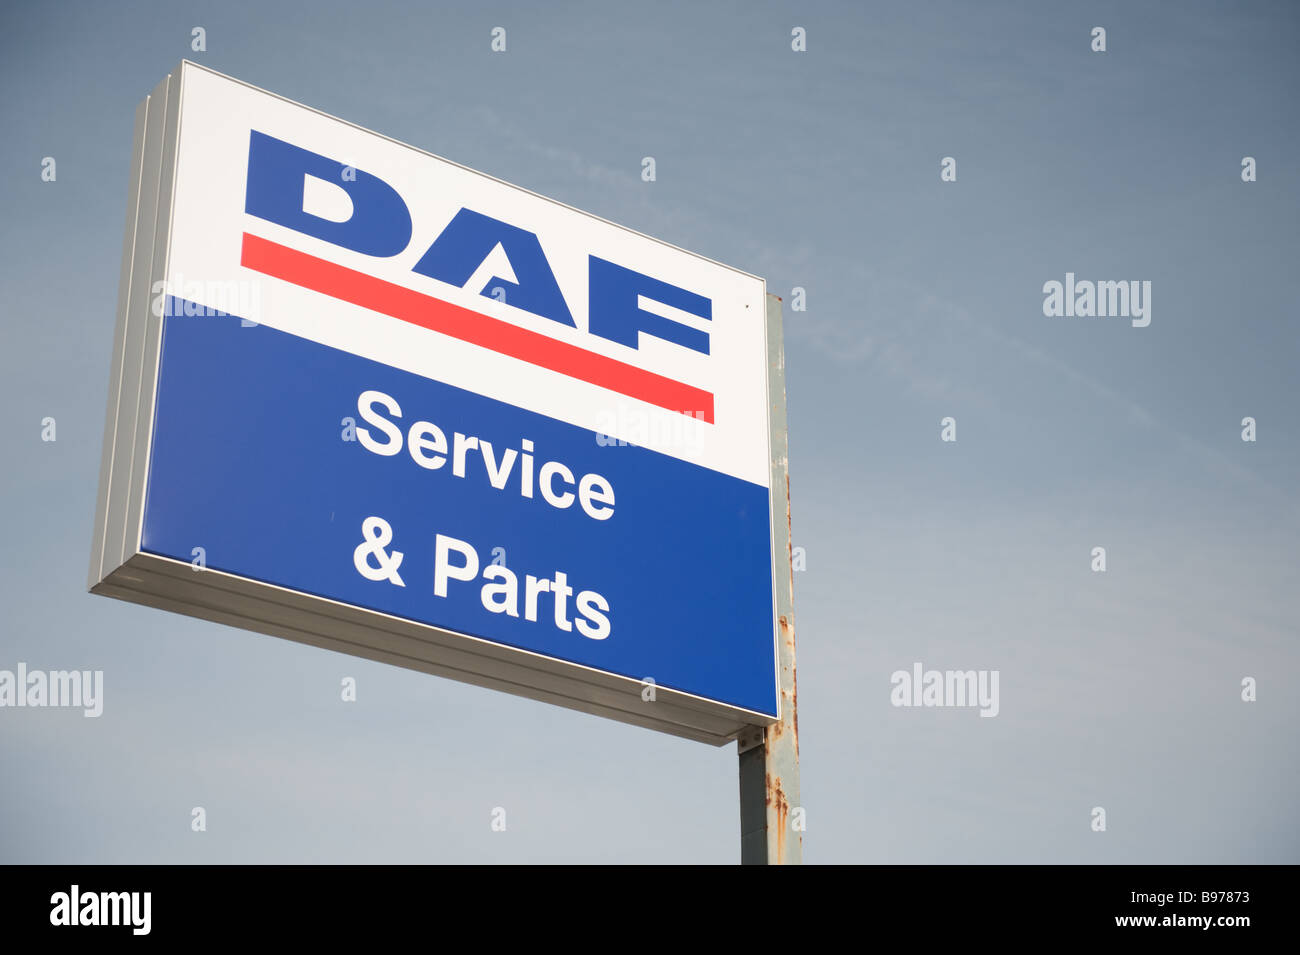 DAF auto spares service and parts, company sign, UK Stock Photo